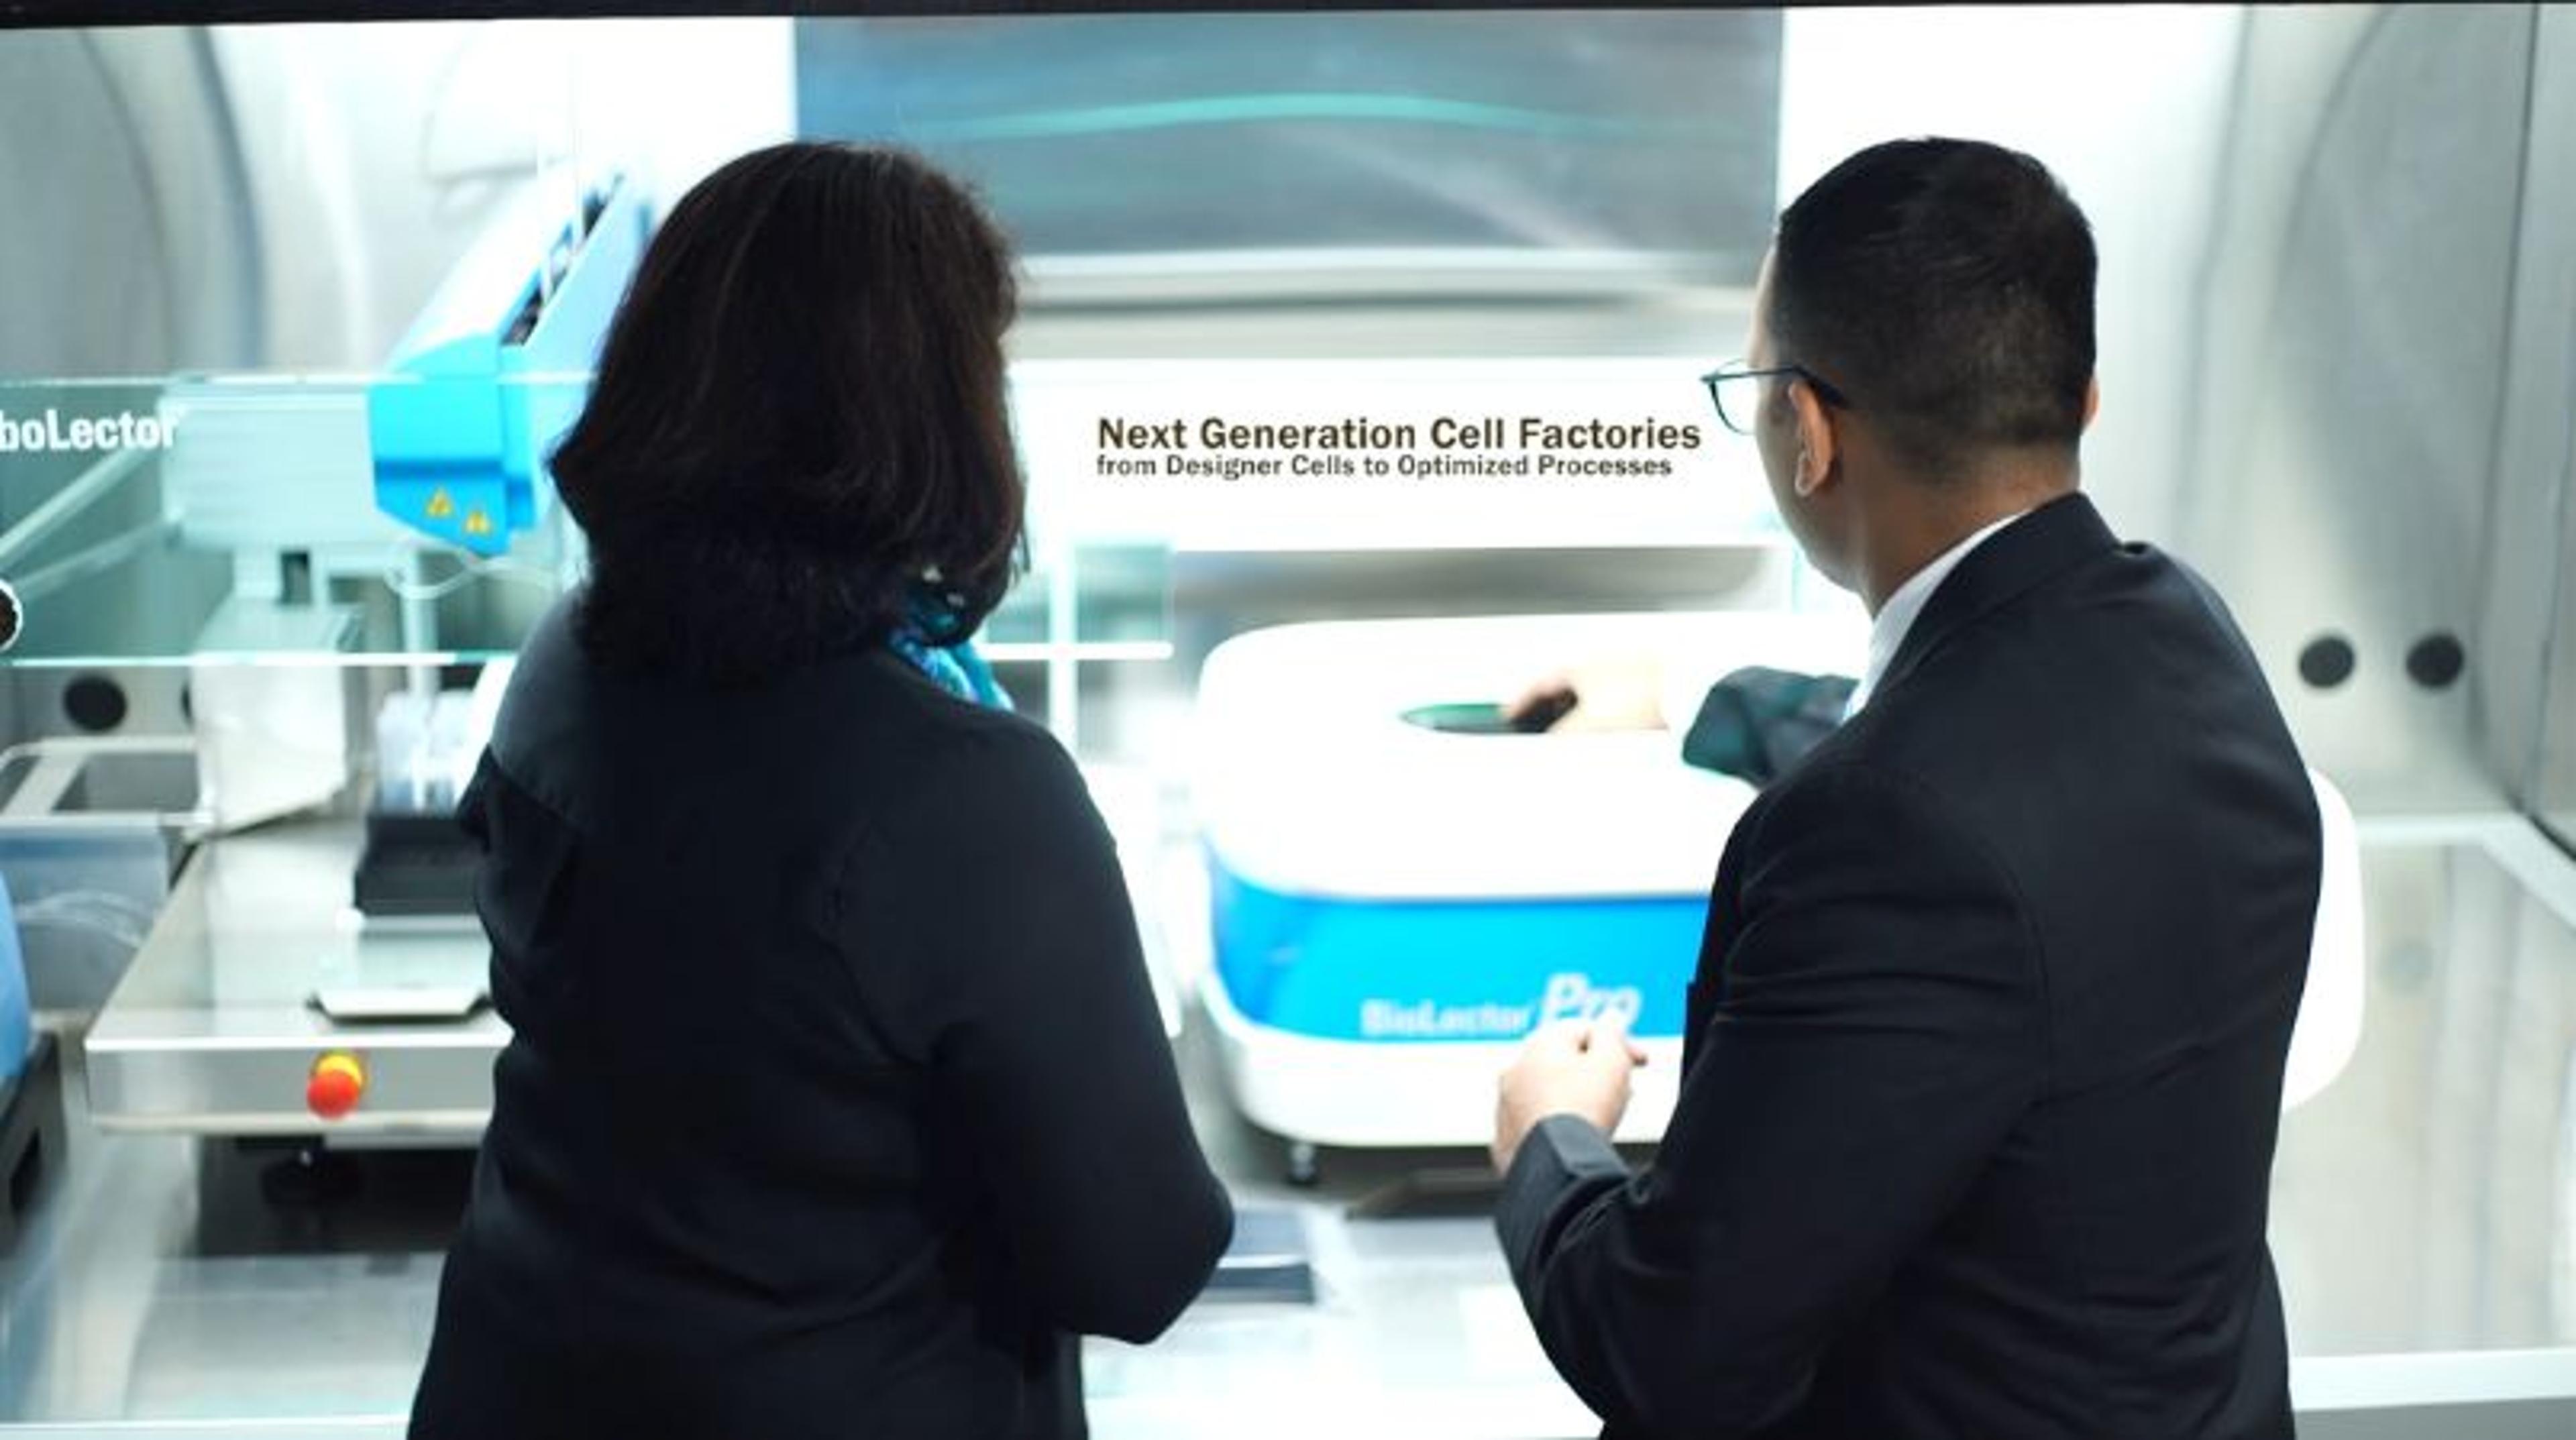 Next generation cell factories: From designer cells to optimized processes